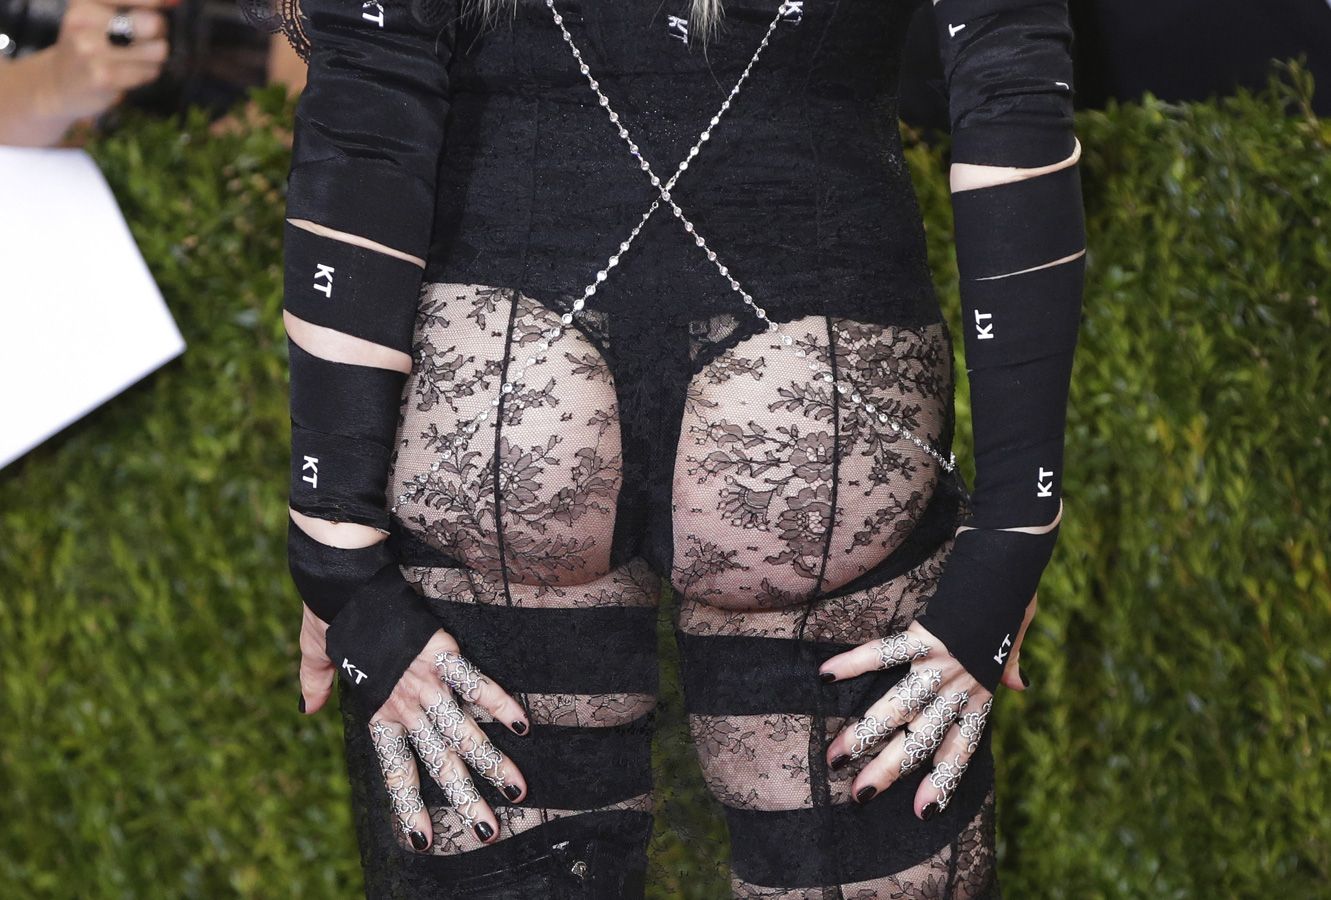 Madonna Is Cheeky In Givenchy At Met Gala 2016!: Photo 3646163, 2016 Met  Gala, Madonna, Met Gala Photos